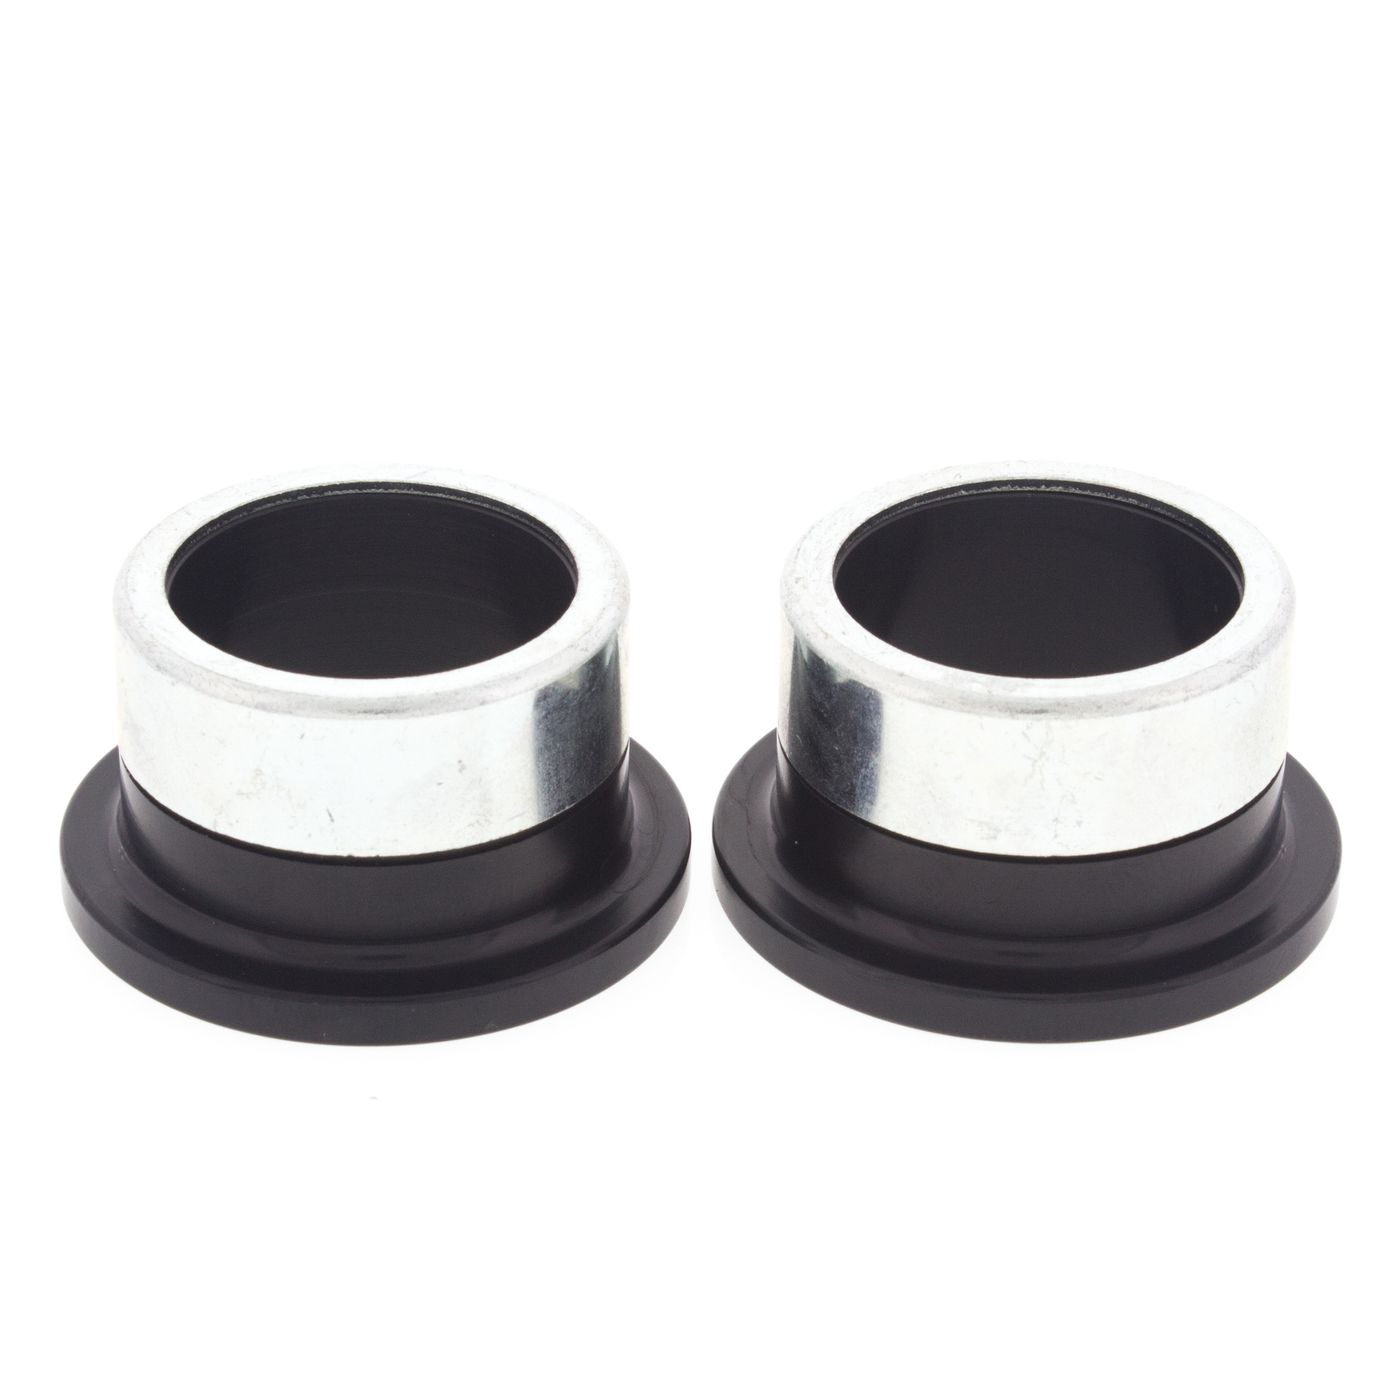 Wrp Rear Wheel Spacer Kits - WRP111099-1 image